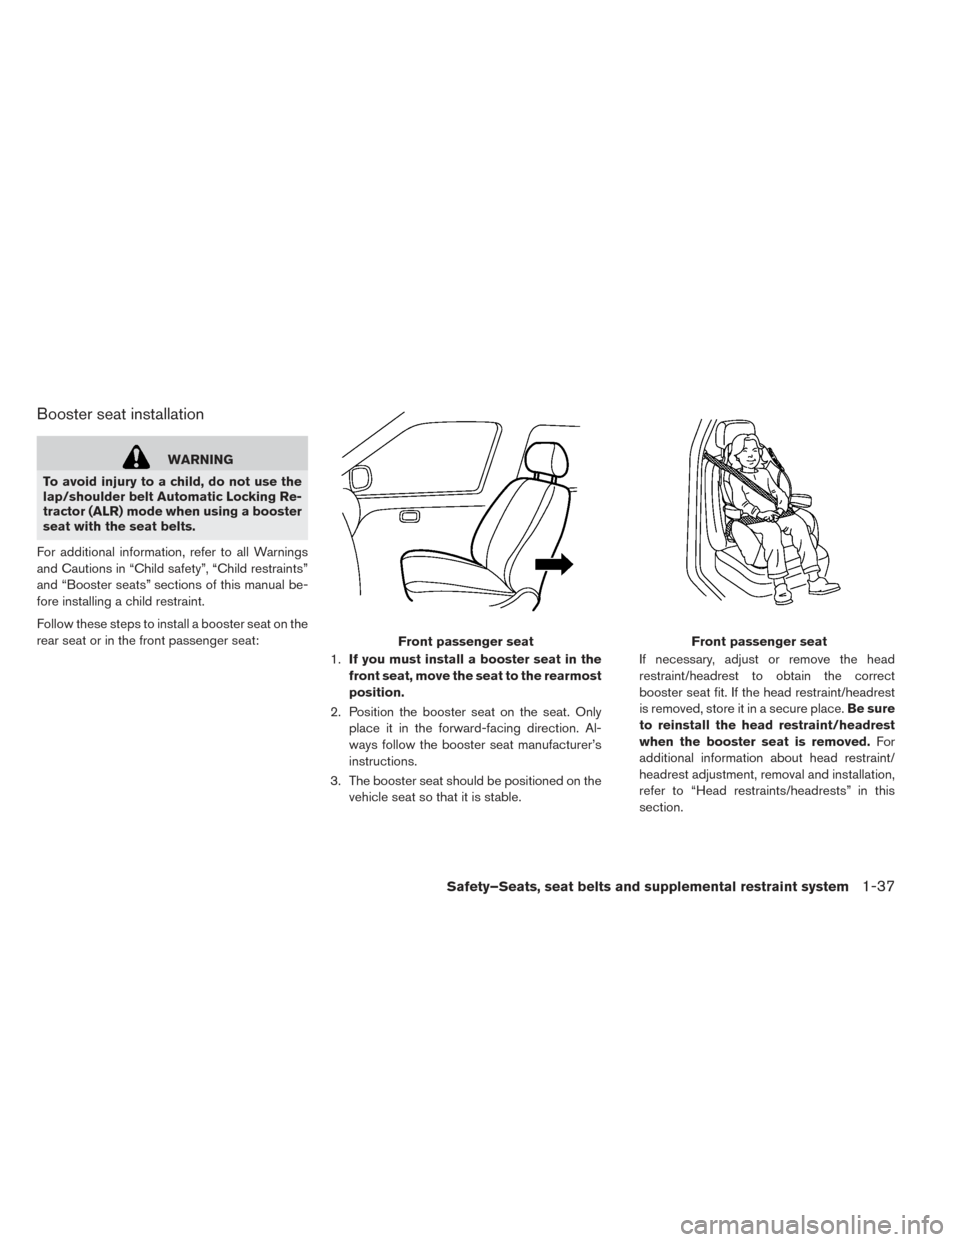 NISSAN LEAF 2016 1.G User Guide Booster seat installation
WARNING
To avoid injury to a child, do not use the
lap/shoulder belt Automatic Locking Re-
tractor (ALR) mode when using a booster
seat with the seat belts.
For additional in